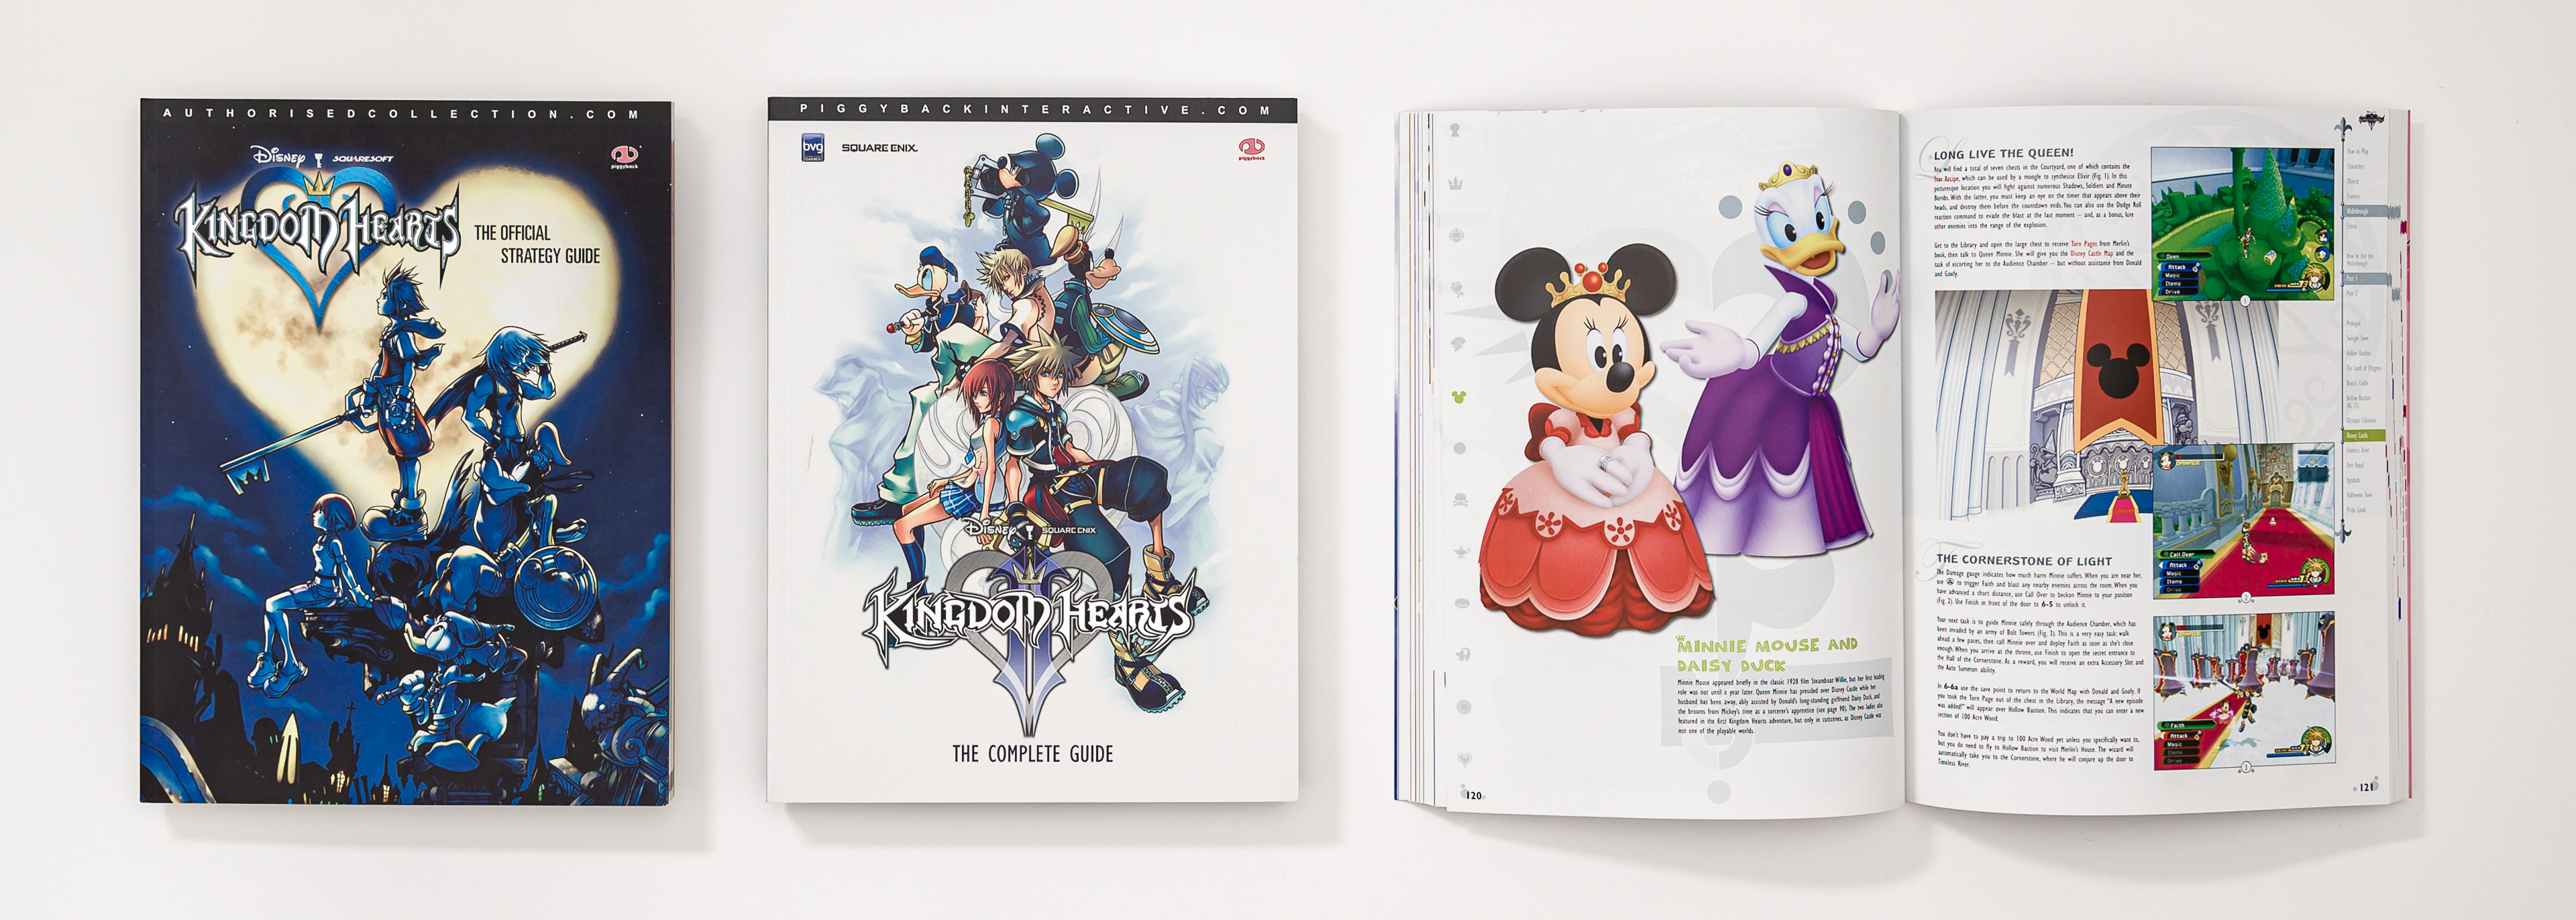 Kingdom Hearts, and when judging a book by its cover goes right - CNET